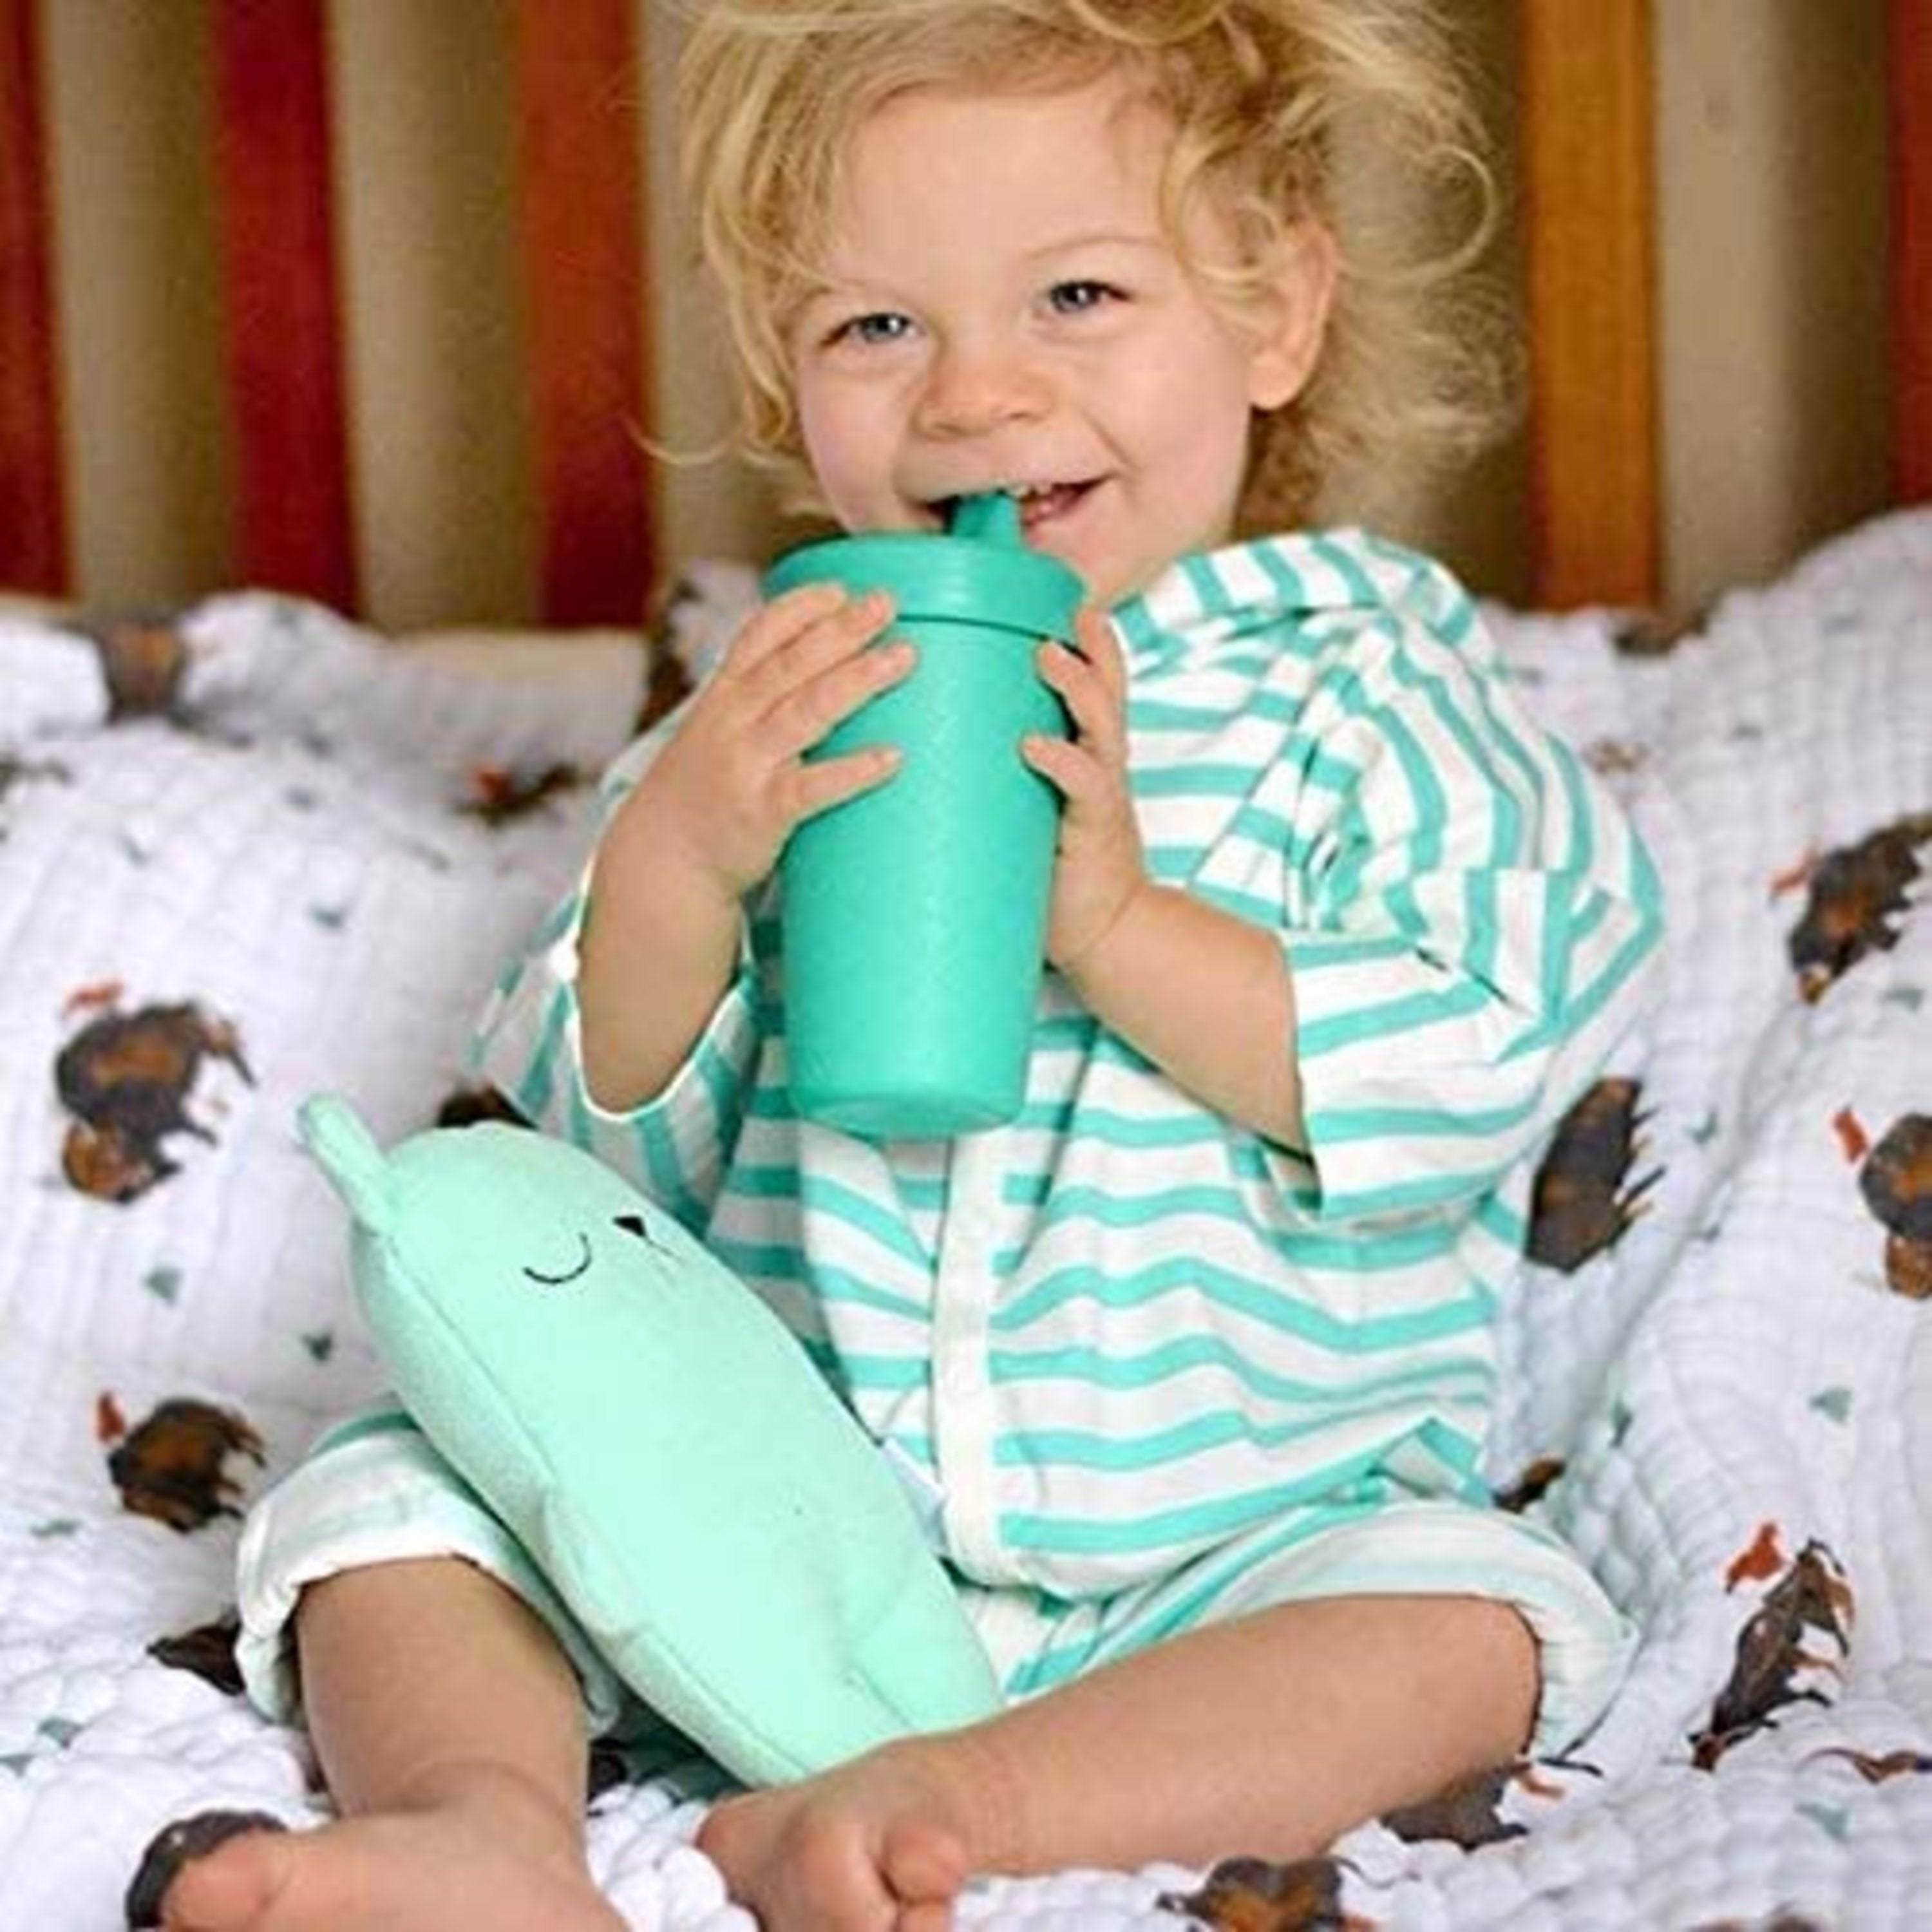 Re-Play No Spill Sippy Cup – Mother Earth Baby/Curious Kidz Toys